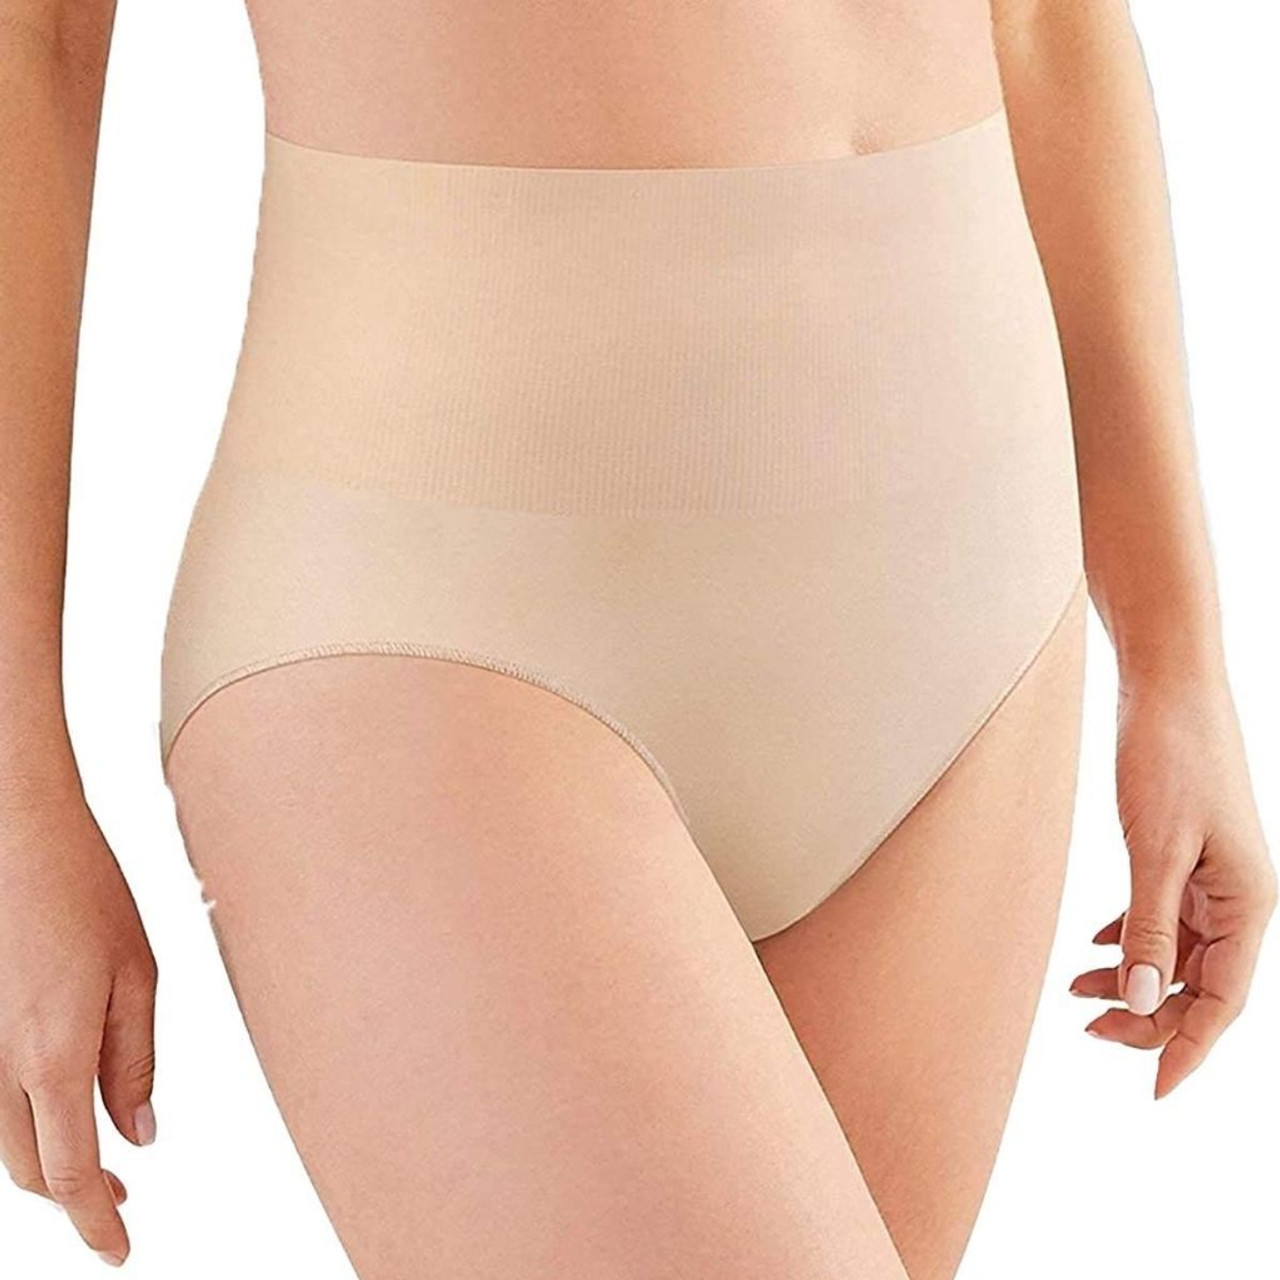 Maidenform® Women’s Cool Comfort® Flexees Smooths Shapewear product image